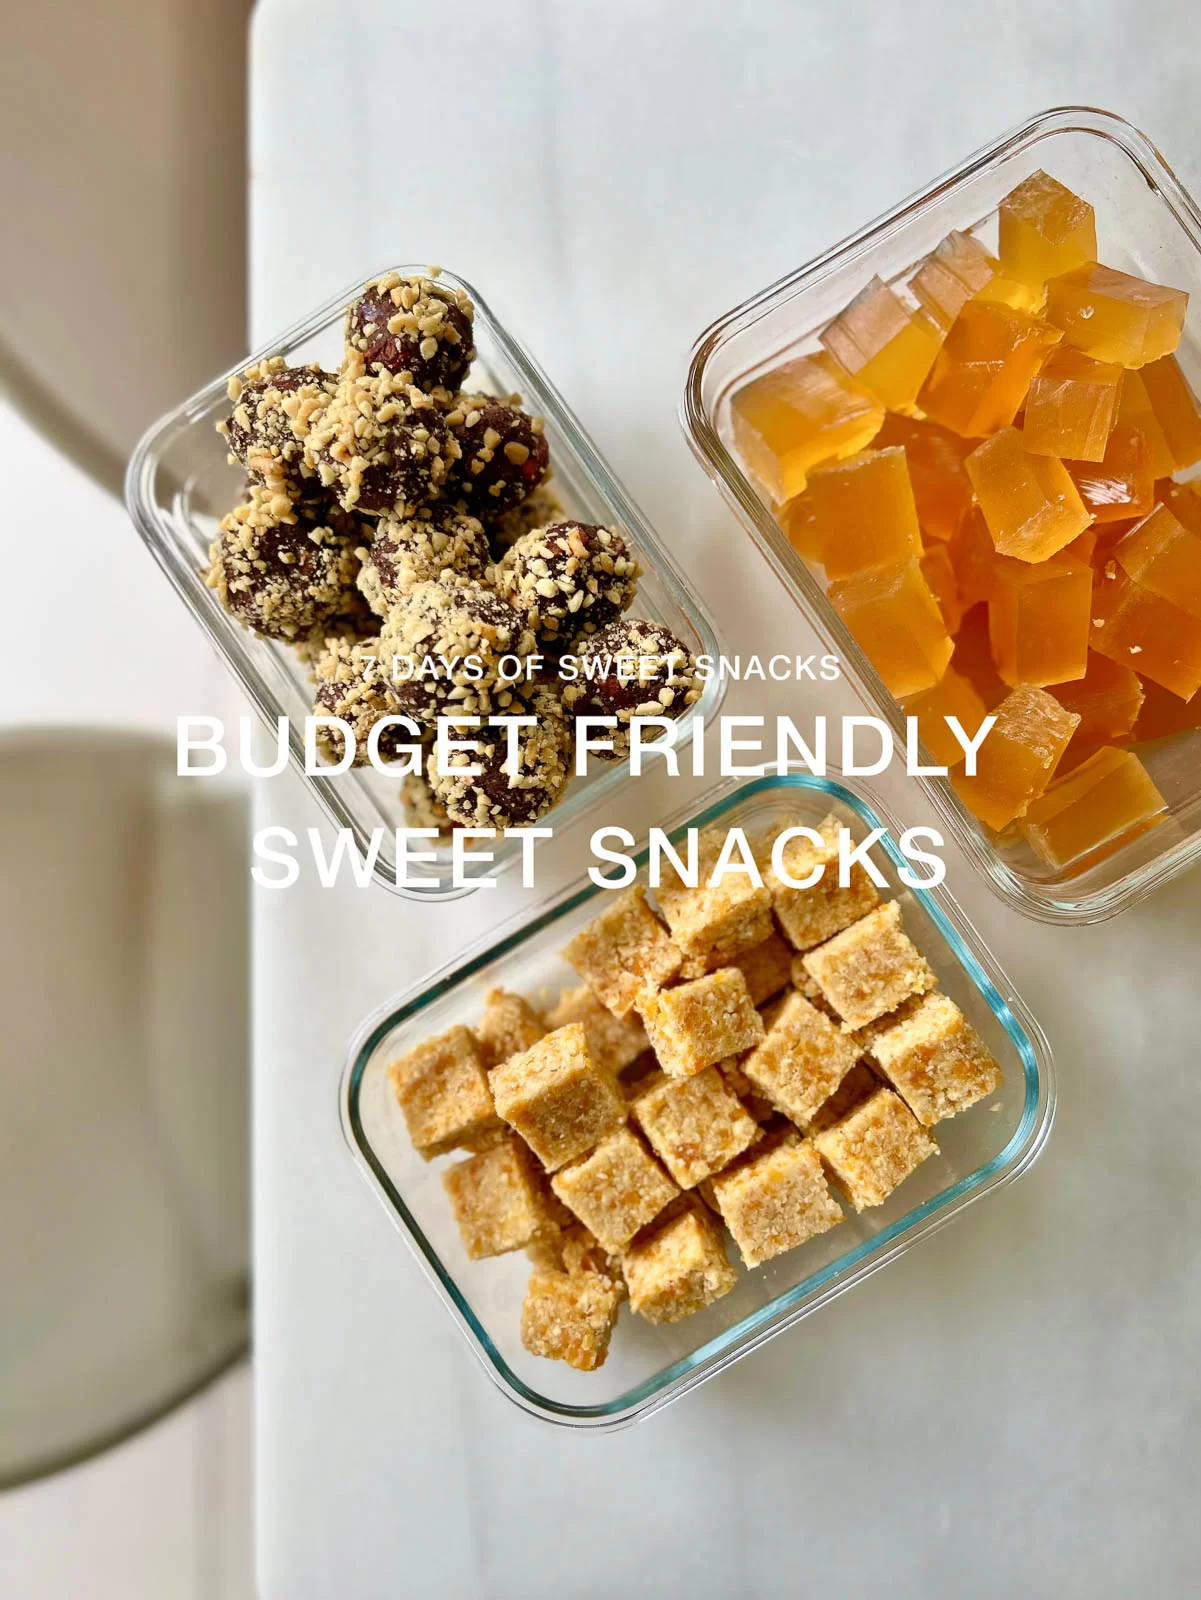 Episode 7 of 7 Days of Sweet Snacks / Budget friendly Sweets